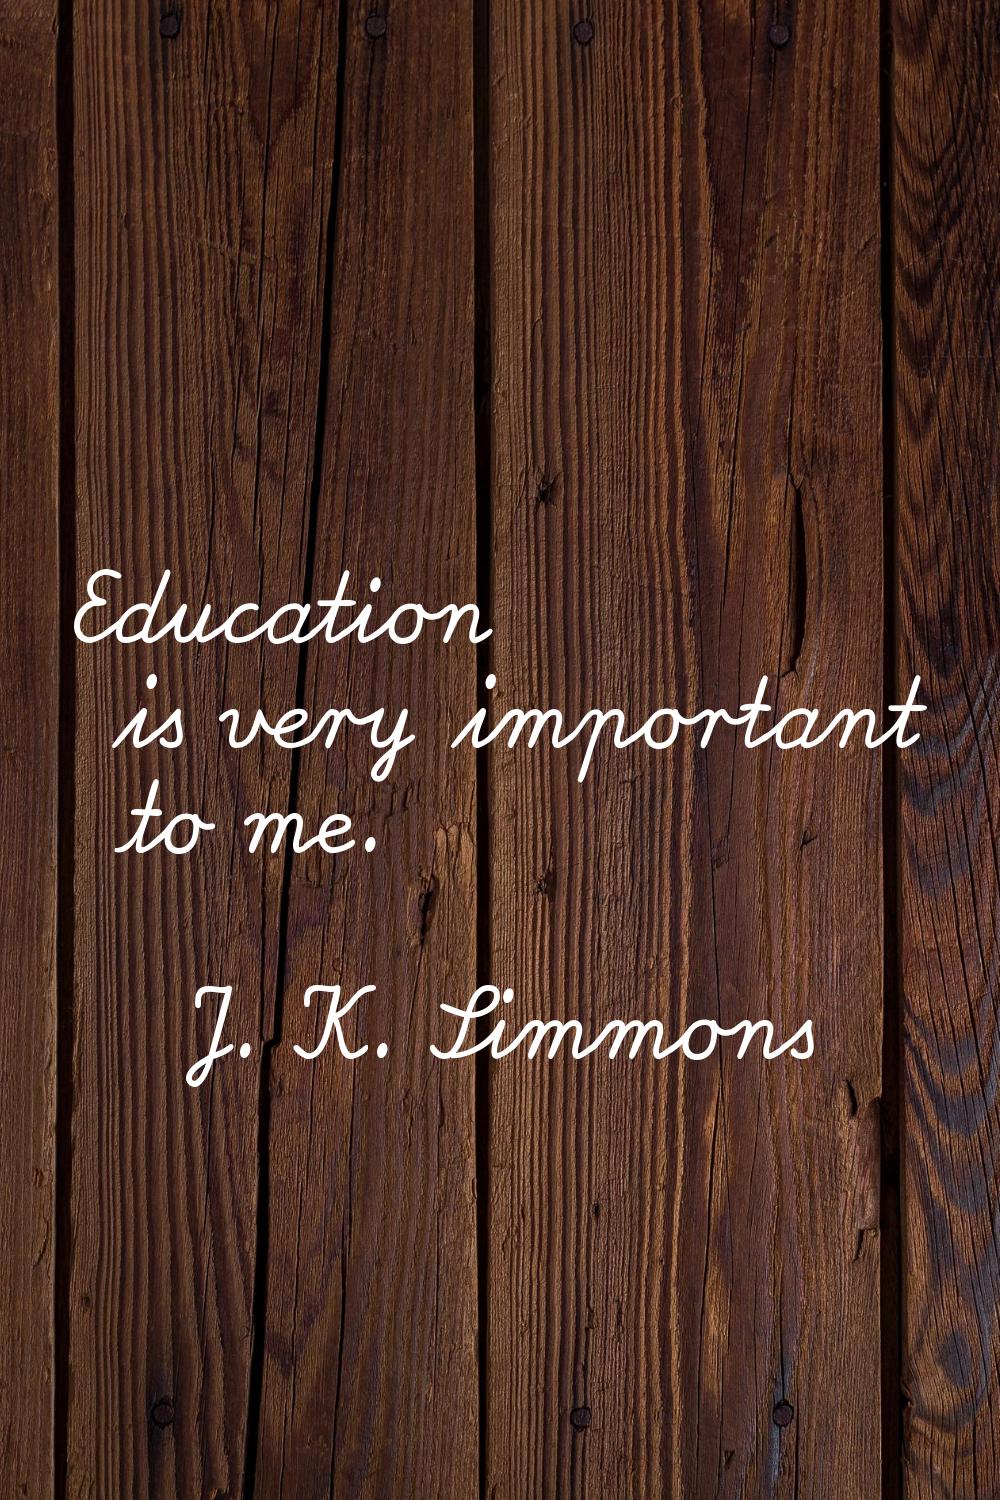 Education is very important to me.